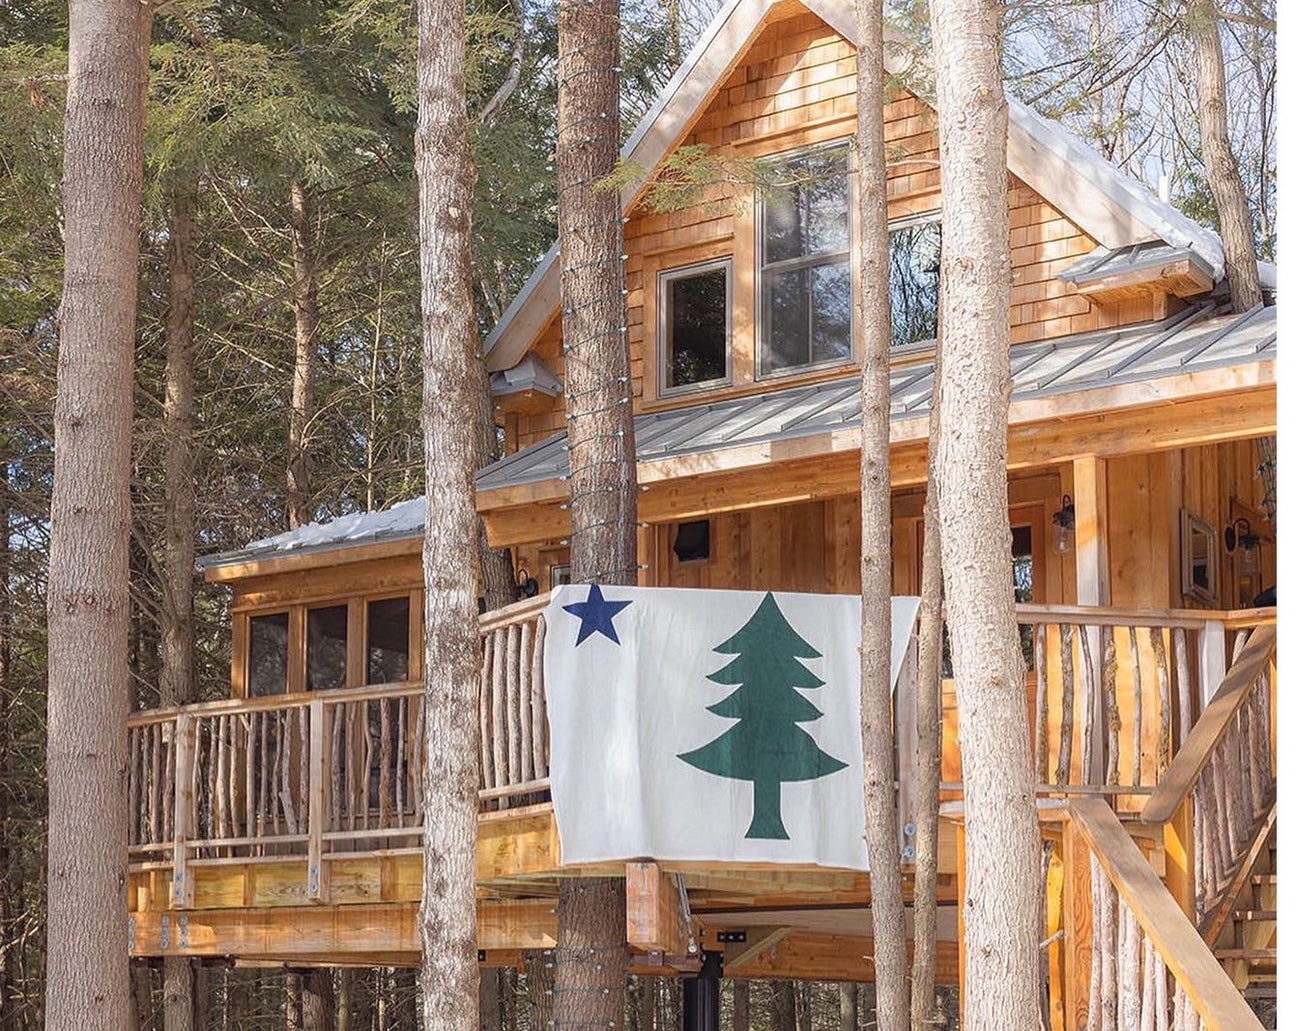 Maine Flag Chappy at The Woods Maine Treehouse in Norway, Maine